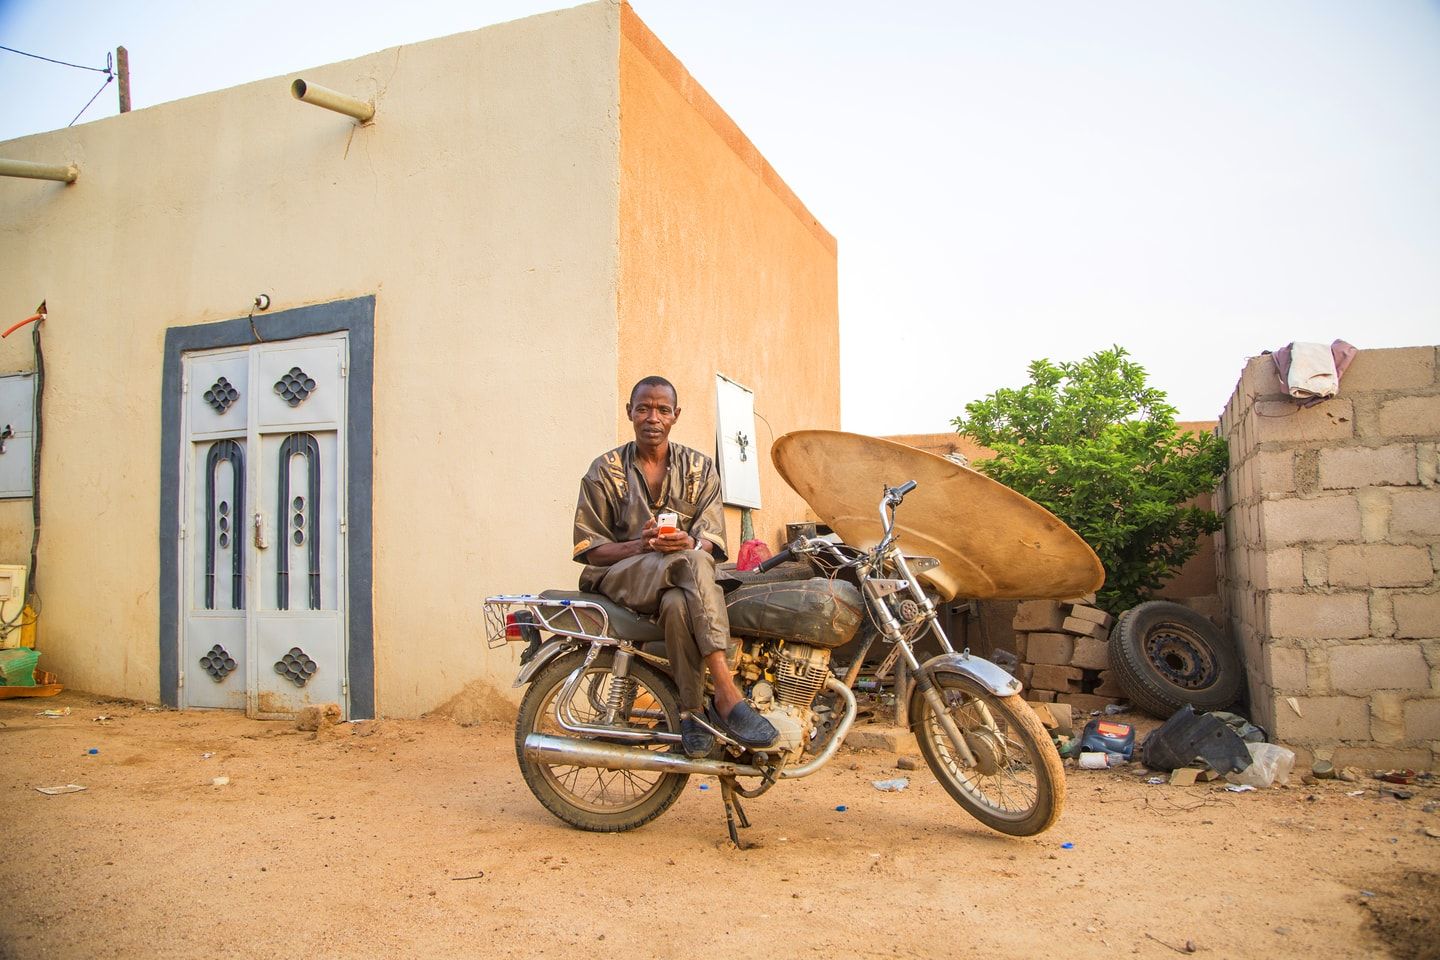 Khalid was about to move to Europe until he realized just how much money he could make by staying. Image by Emily Kassie. Niger, 2016.